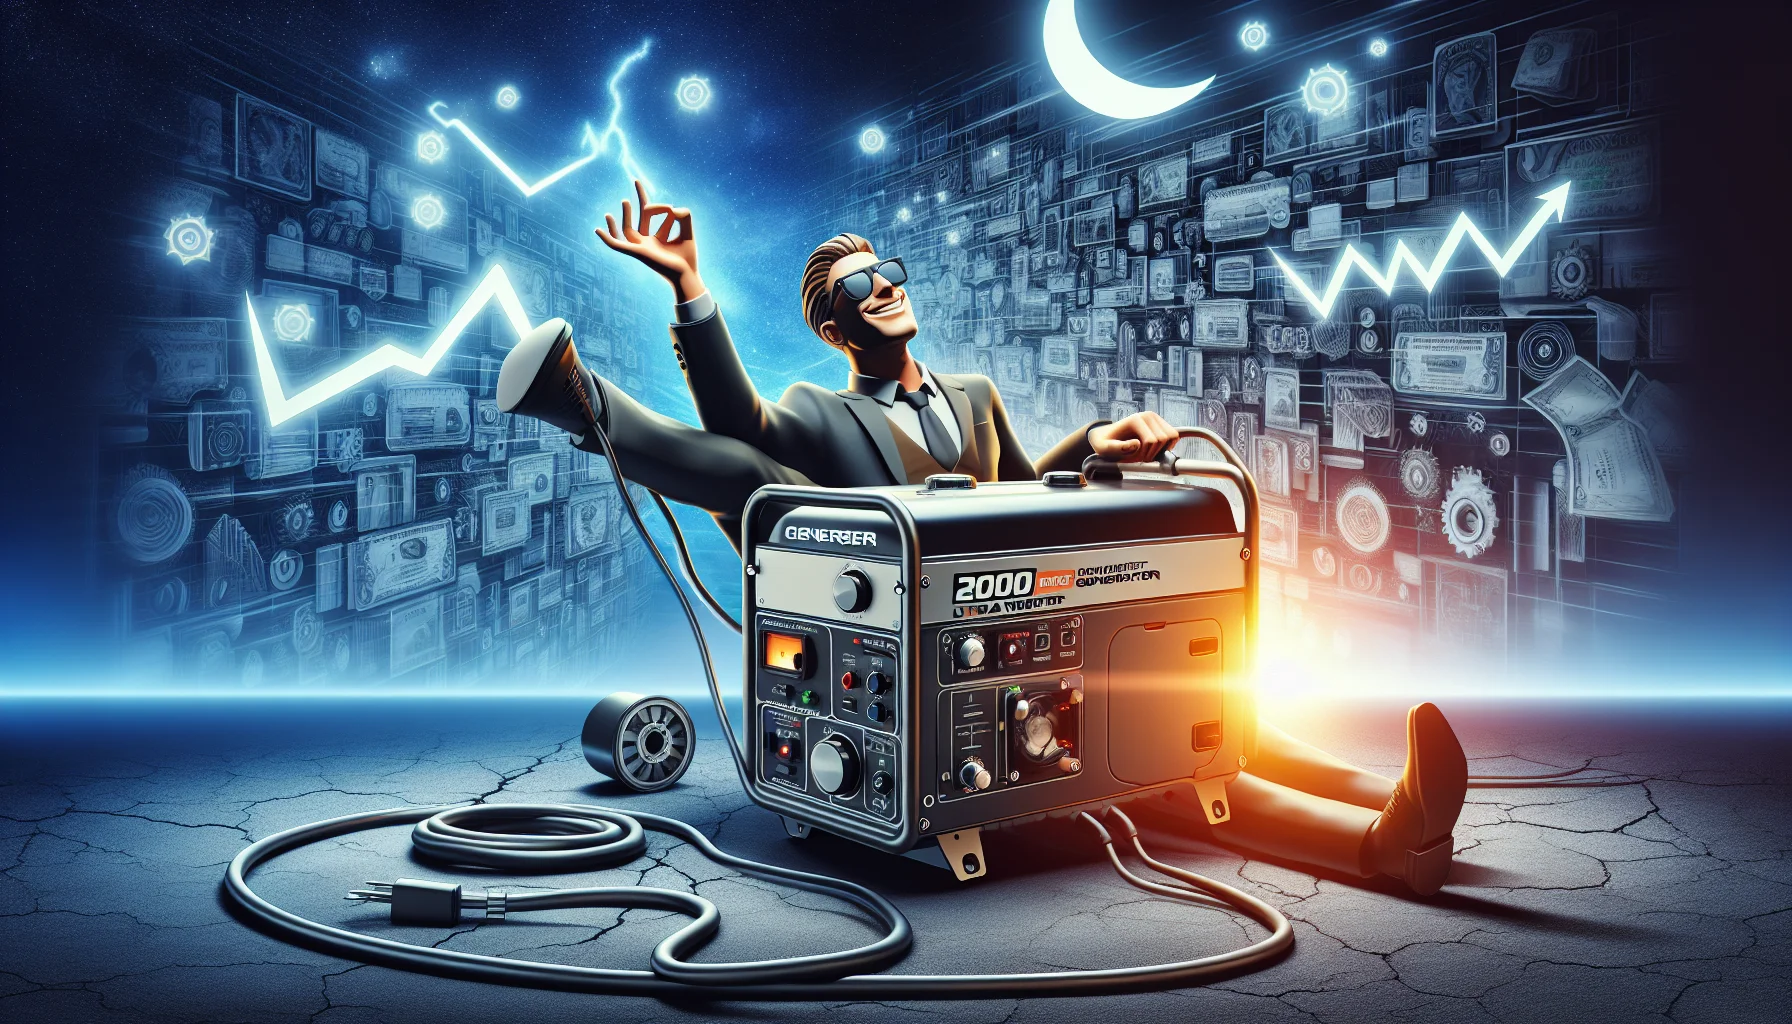 Generate a comical and imaginative image of an operator enjoying himself while using a 2000 watt ultra-silent inverter generator, the pinnacle of energy generation equipment. Around him, there's a contrast between a lack of power and the convivial atmosphere illuminated by the electricity produced by the generator. The generator itself is stylized and engrossing, with noticeable design features that showcase its power and efficiency, adding to the humor of the situation. Remember: the focus is not only on the generator but also on the amusement it brings to the user, creating an enticing proposition about generating electricity.